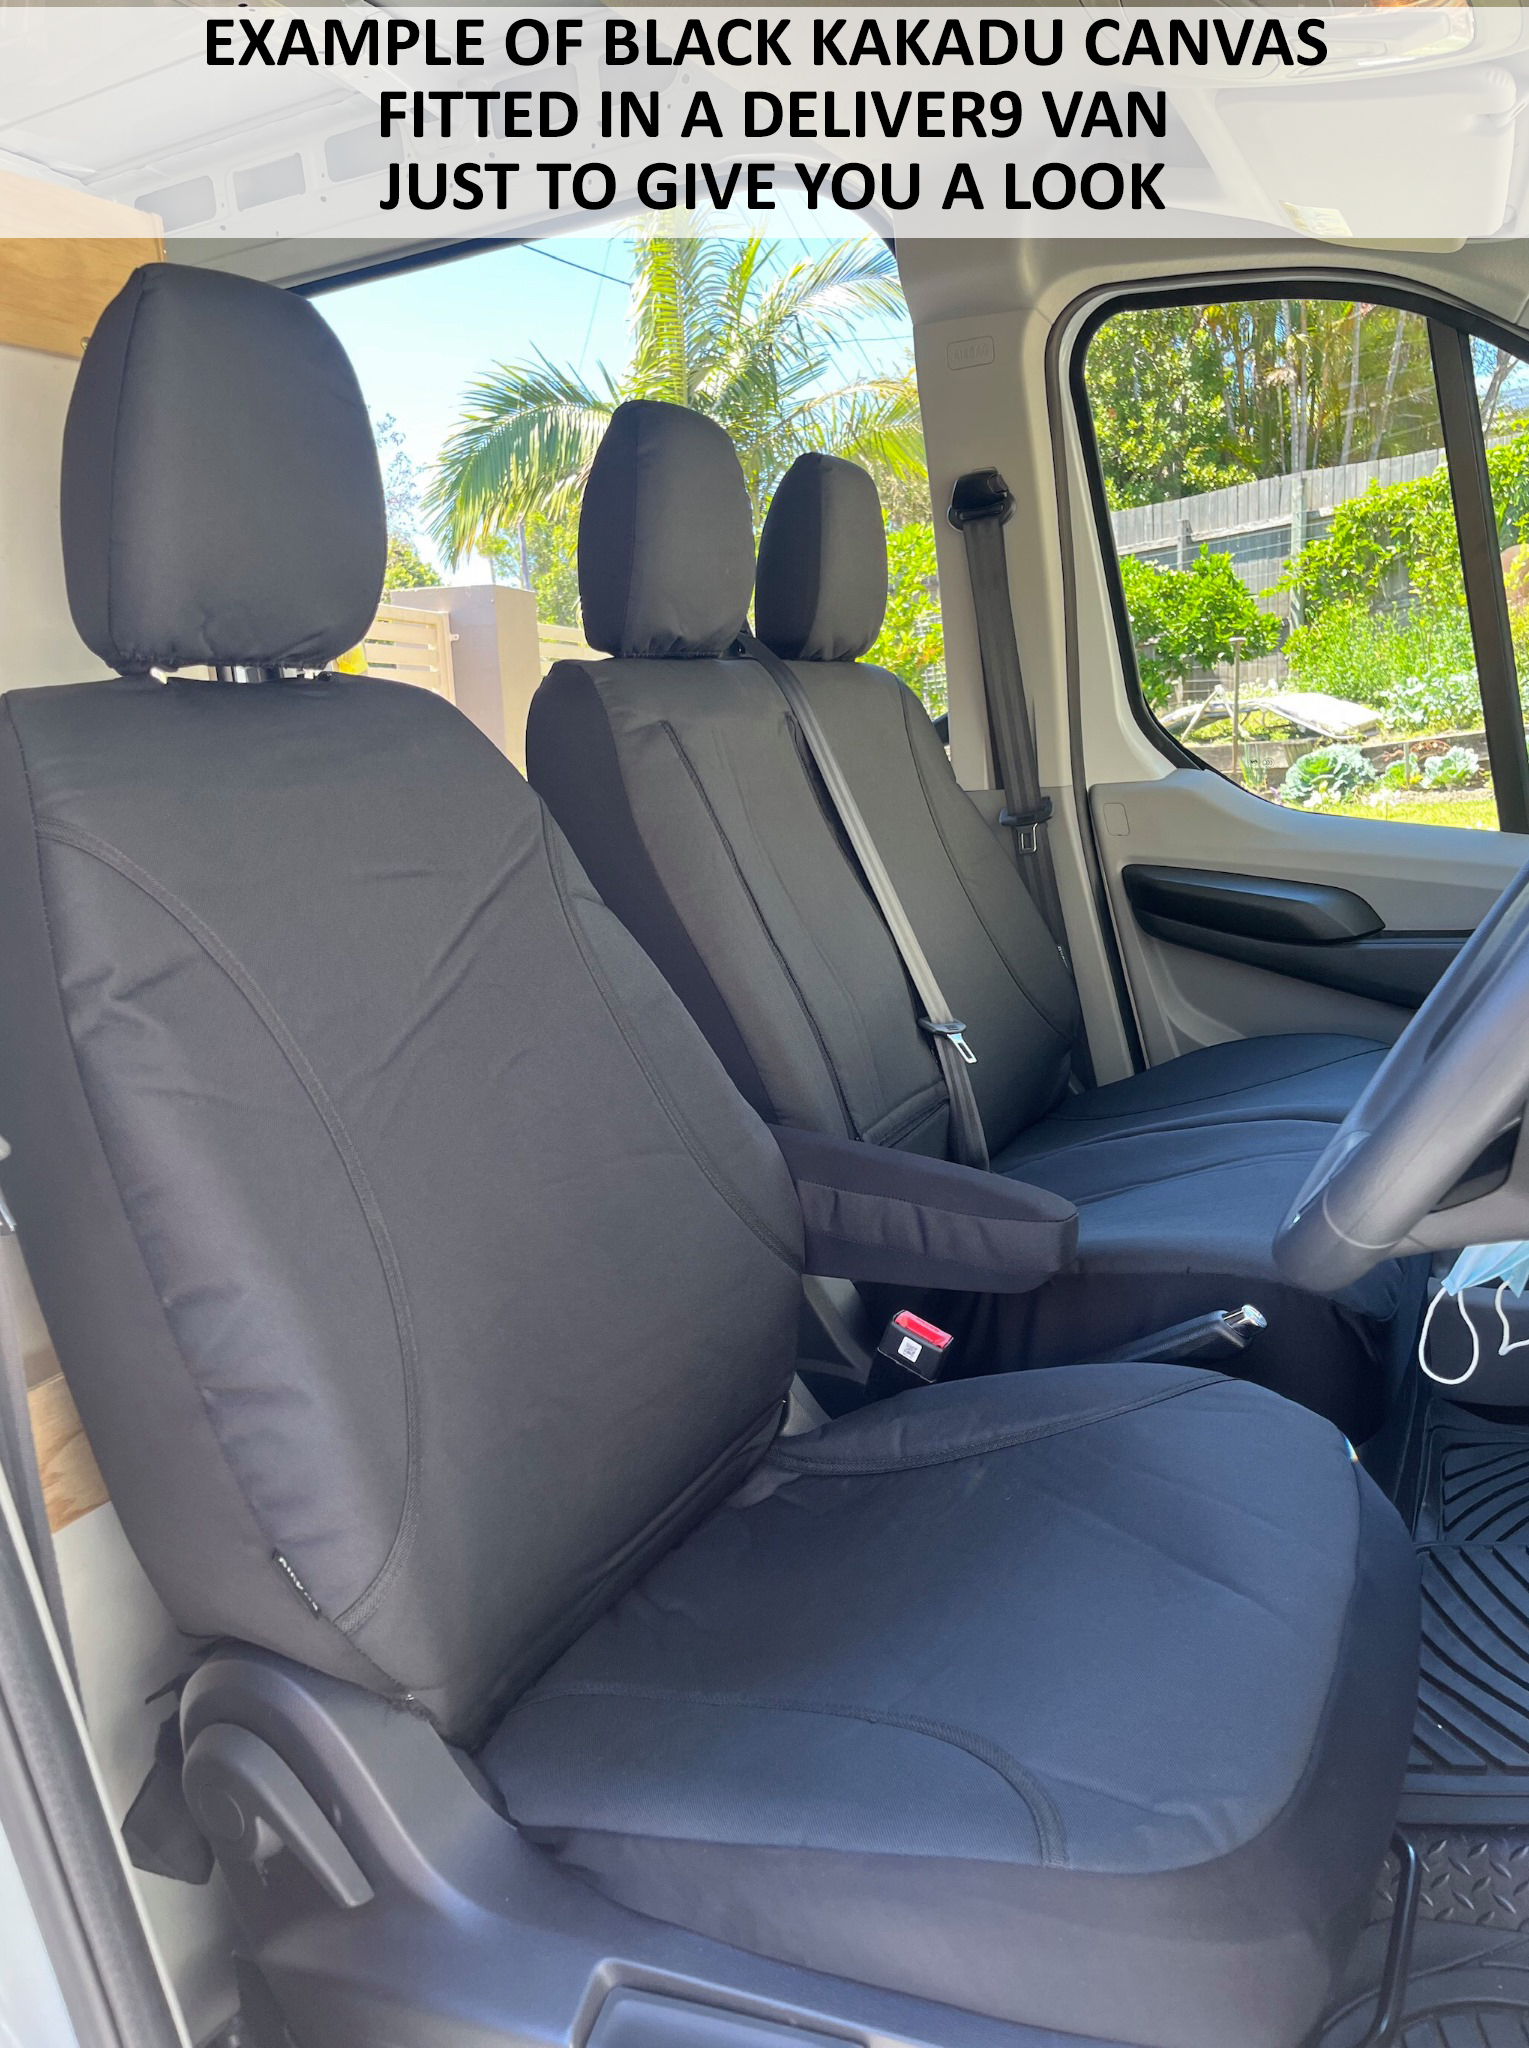 HERE IS AN EXAMPLE OF BLACK KAKADU CANVAS SEAT COVERS FITTED IN AN LDV DELIVER  VAN JUST TO GIVE YOU A LOOK